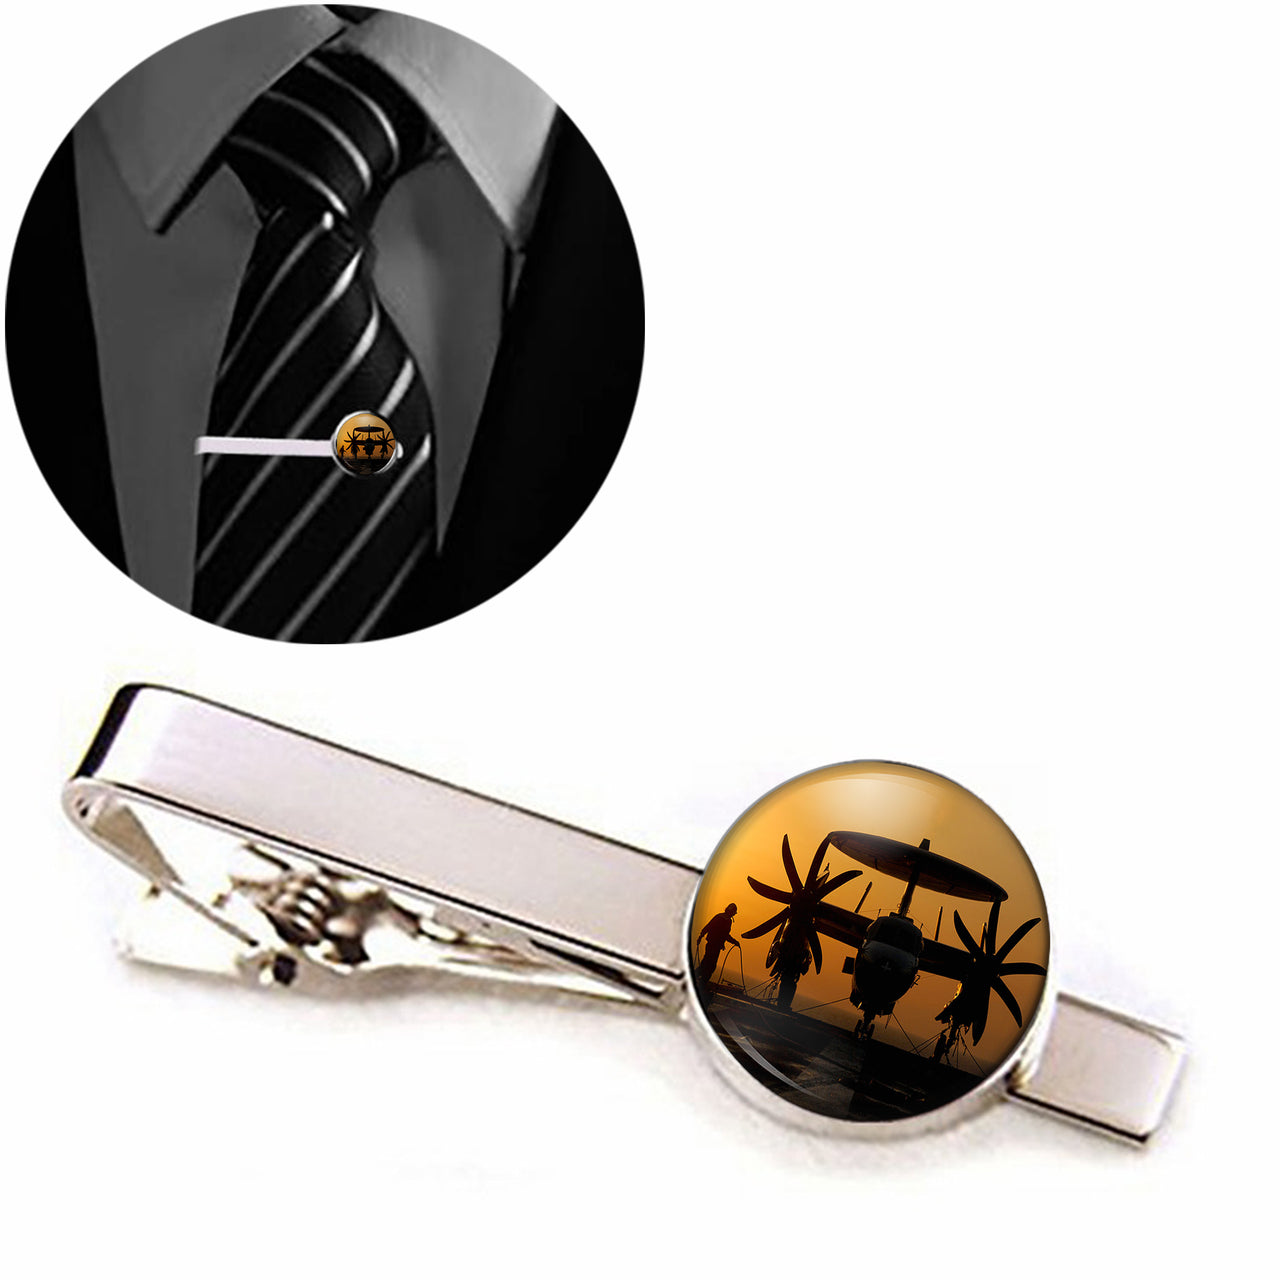 Military Plane at Sunset Designed Tie Clips